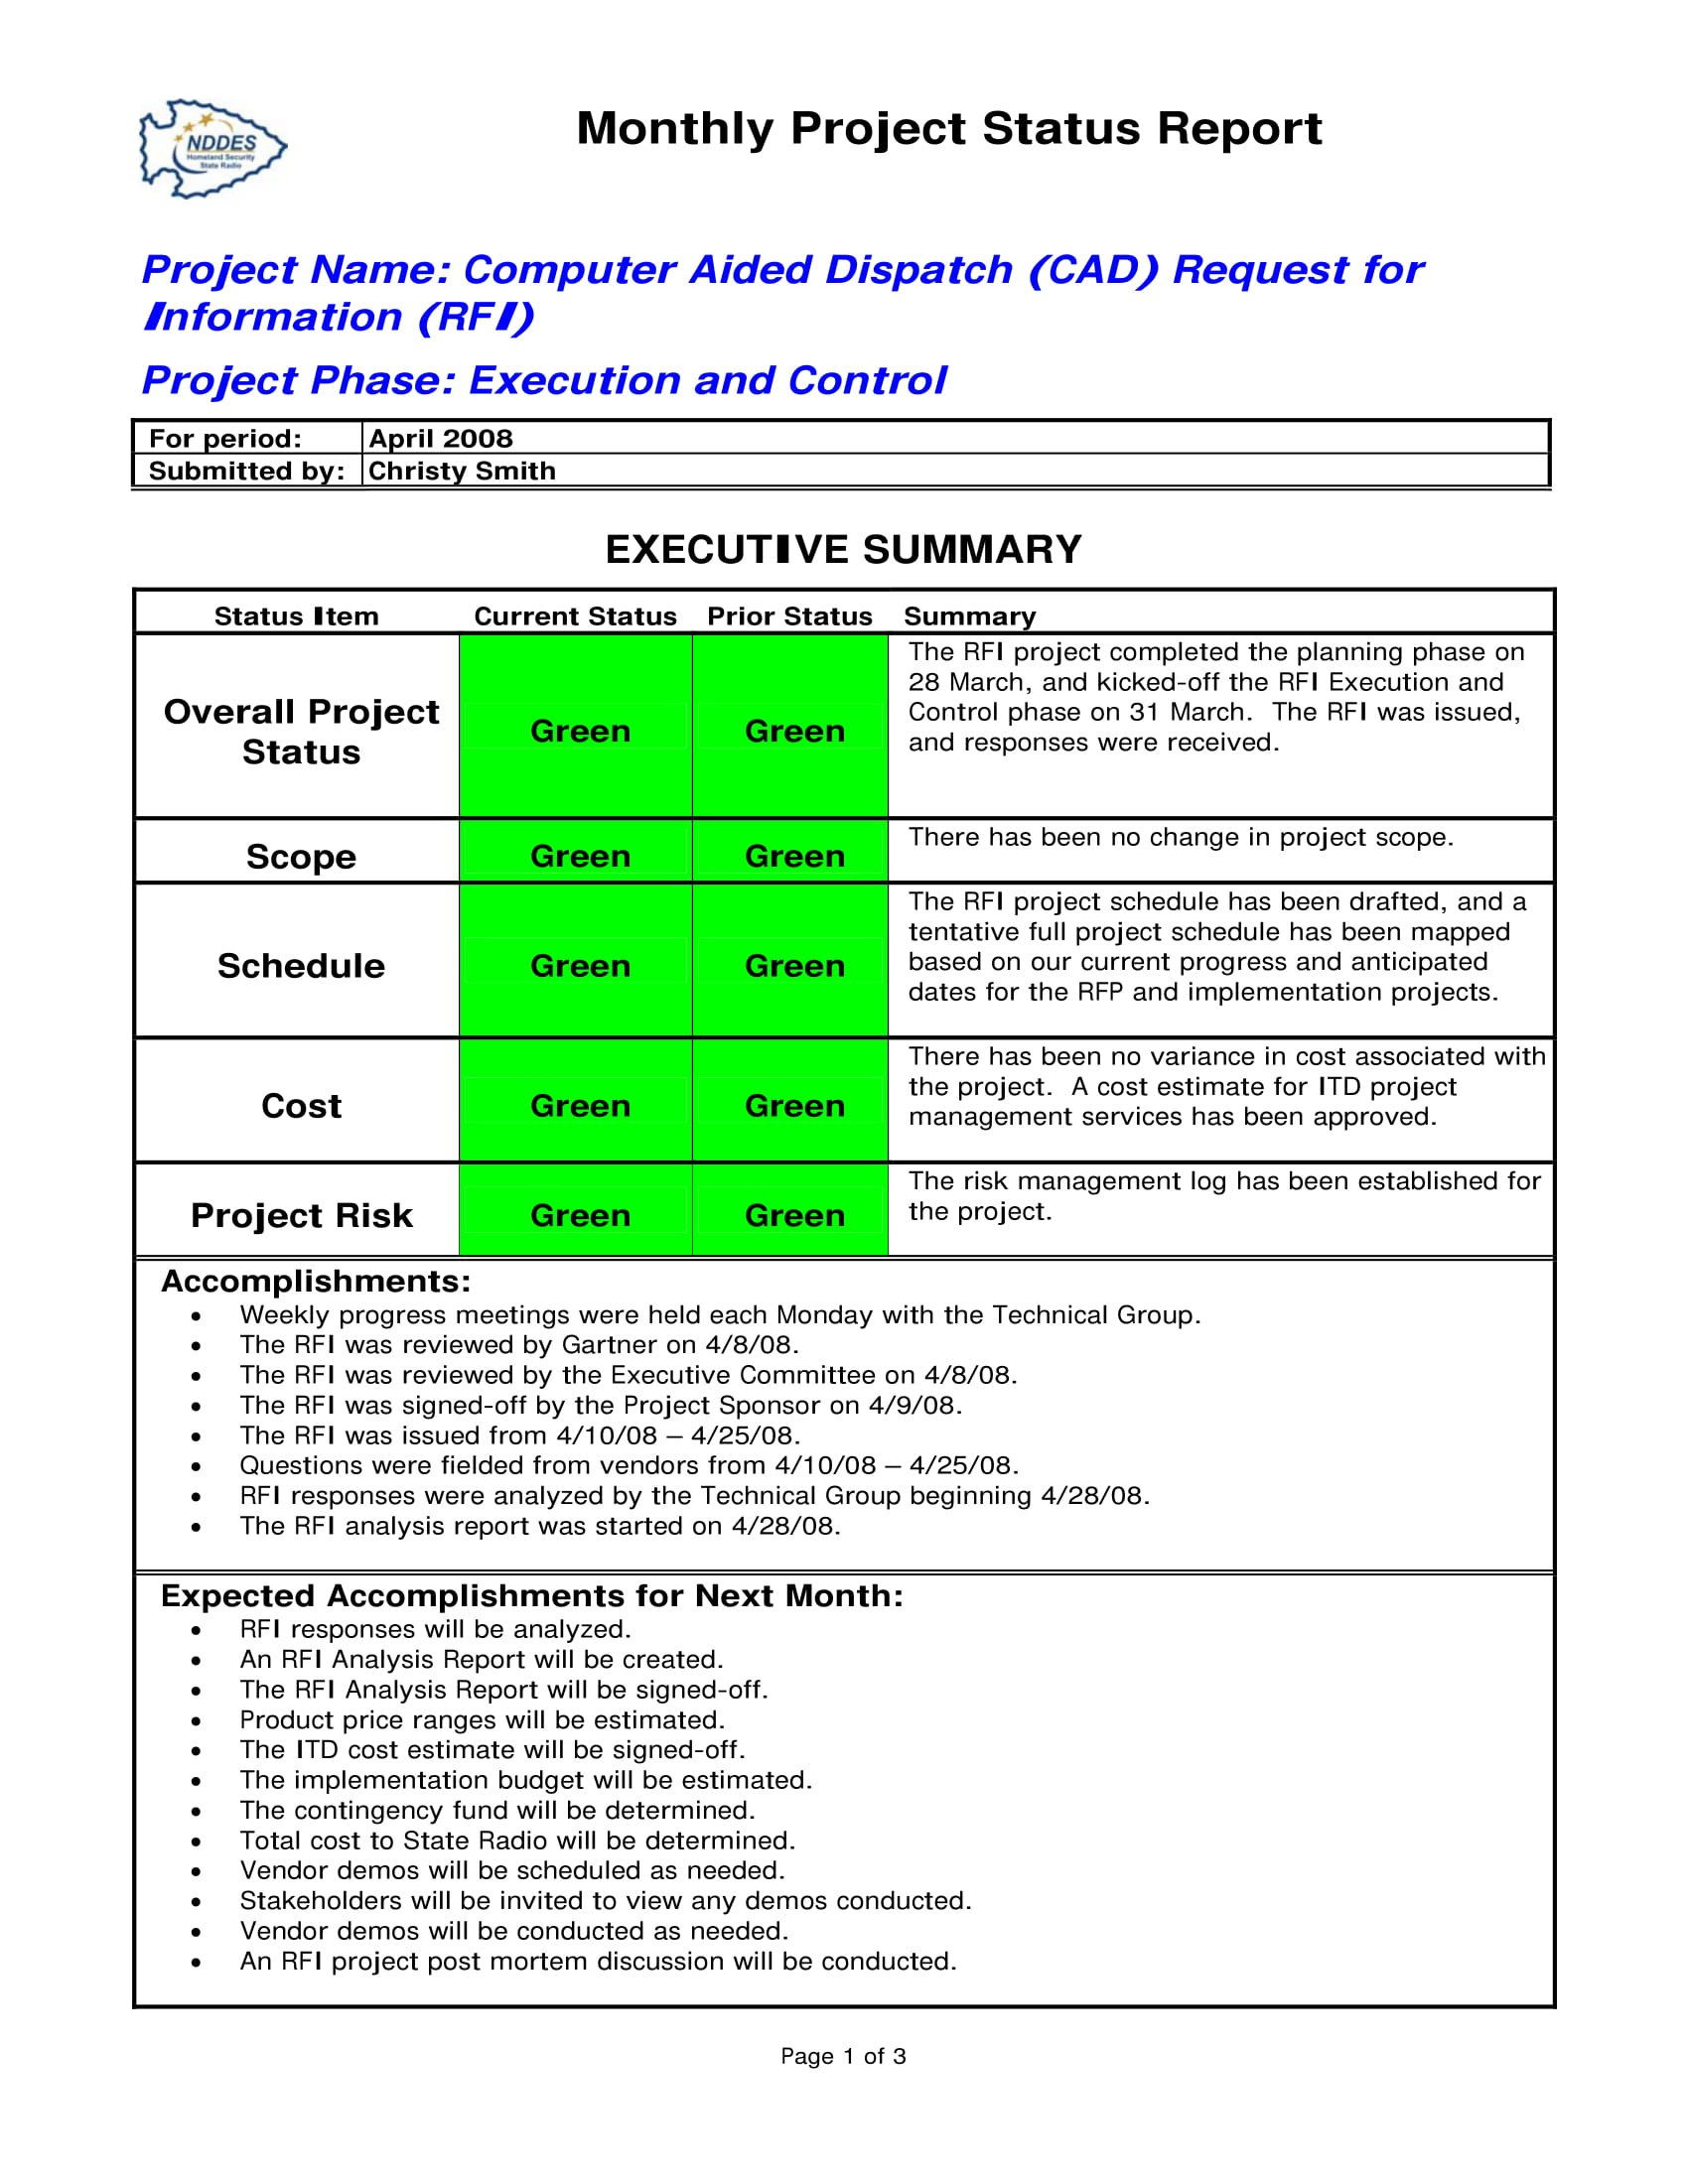 Status Report Examples  Doc Pdf  Examples intended for Monthly Project Progress Report Template